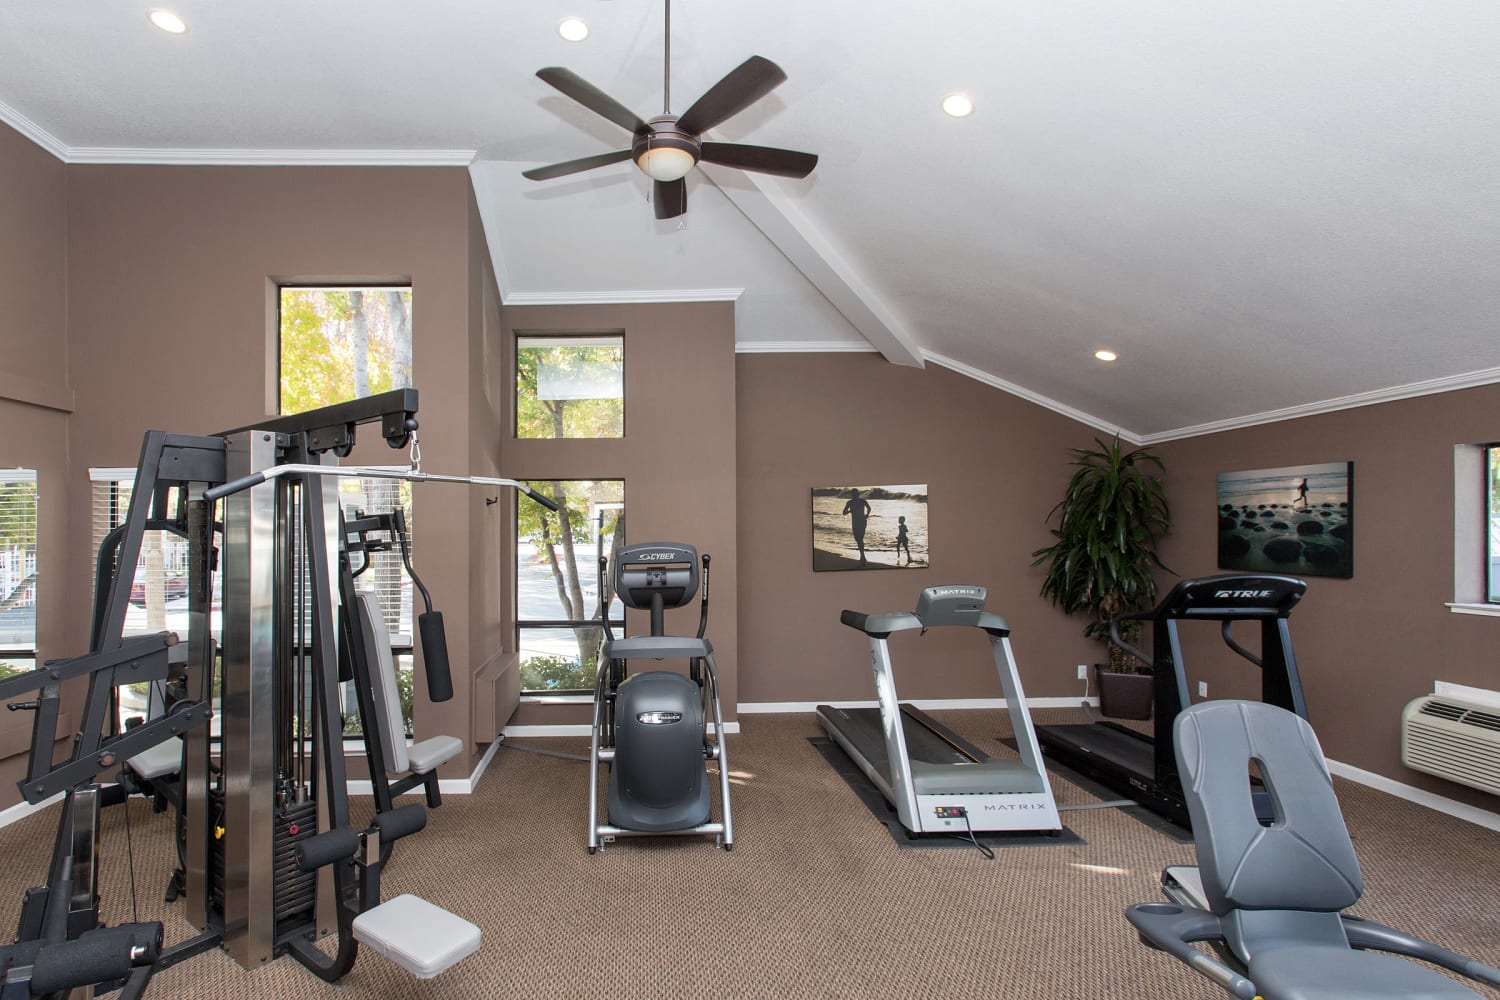 Treadmills in the fitness center at Amber Court in Fremont, California